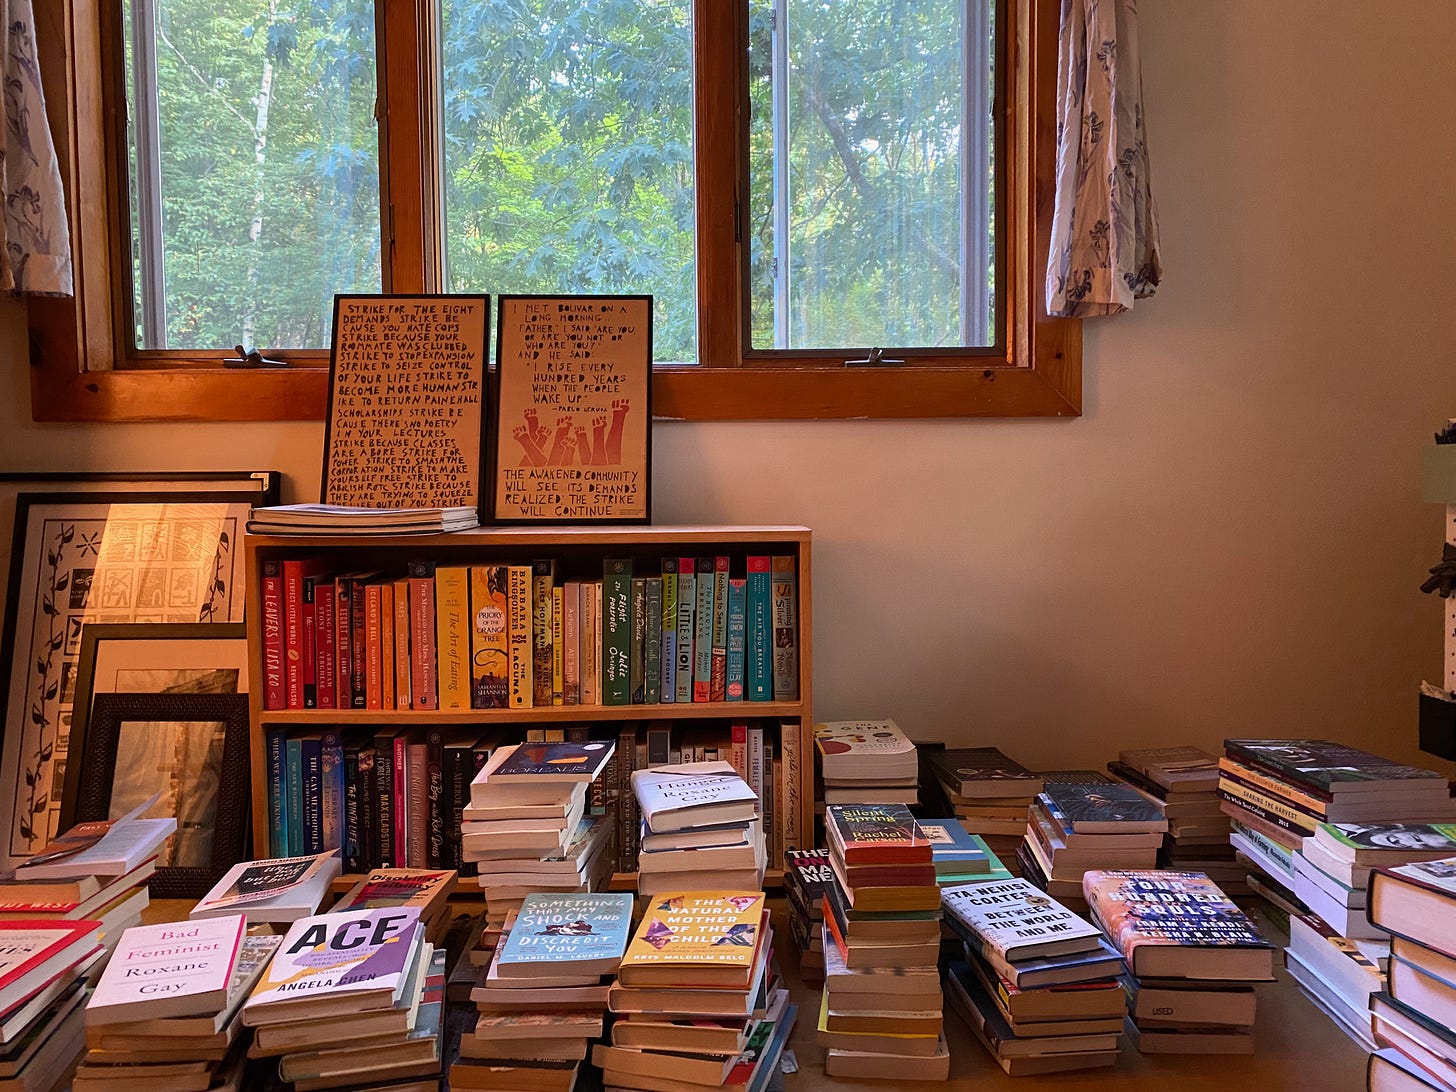 A floor covered with stacks and stacks of books. There is a bookcase against the wall under a window, filled with books arranged in a rainbow pattern, and several pieces of art lean next to it and on top of it.